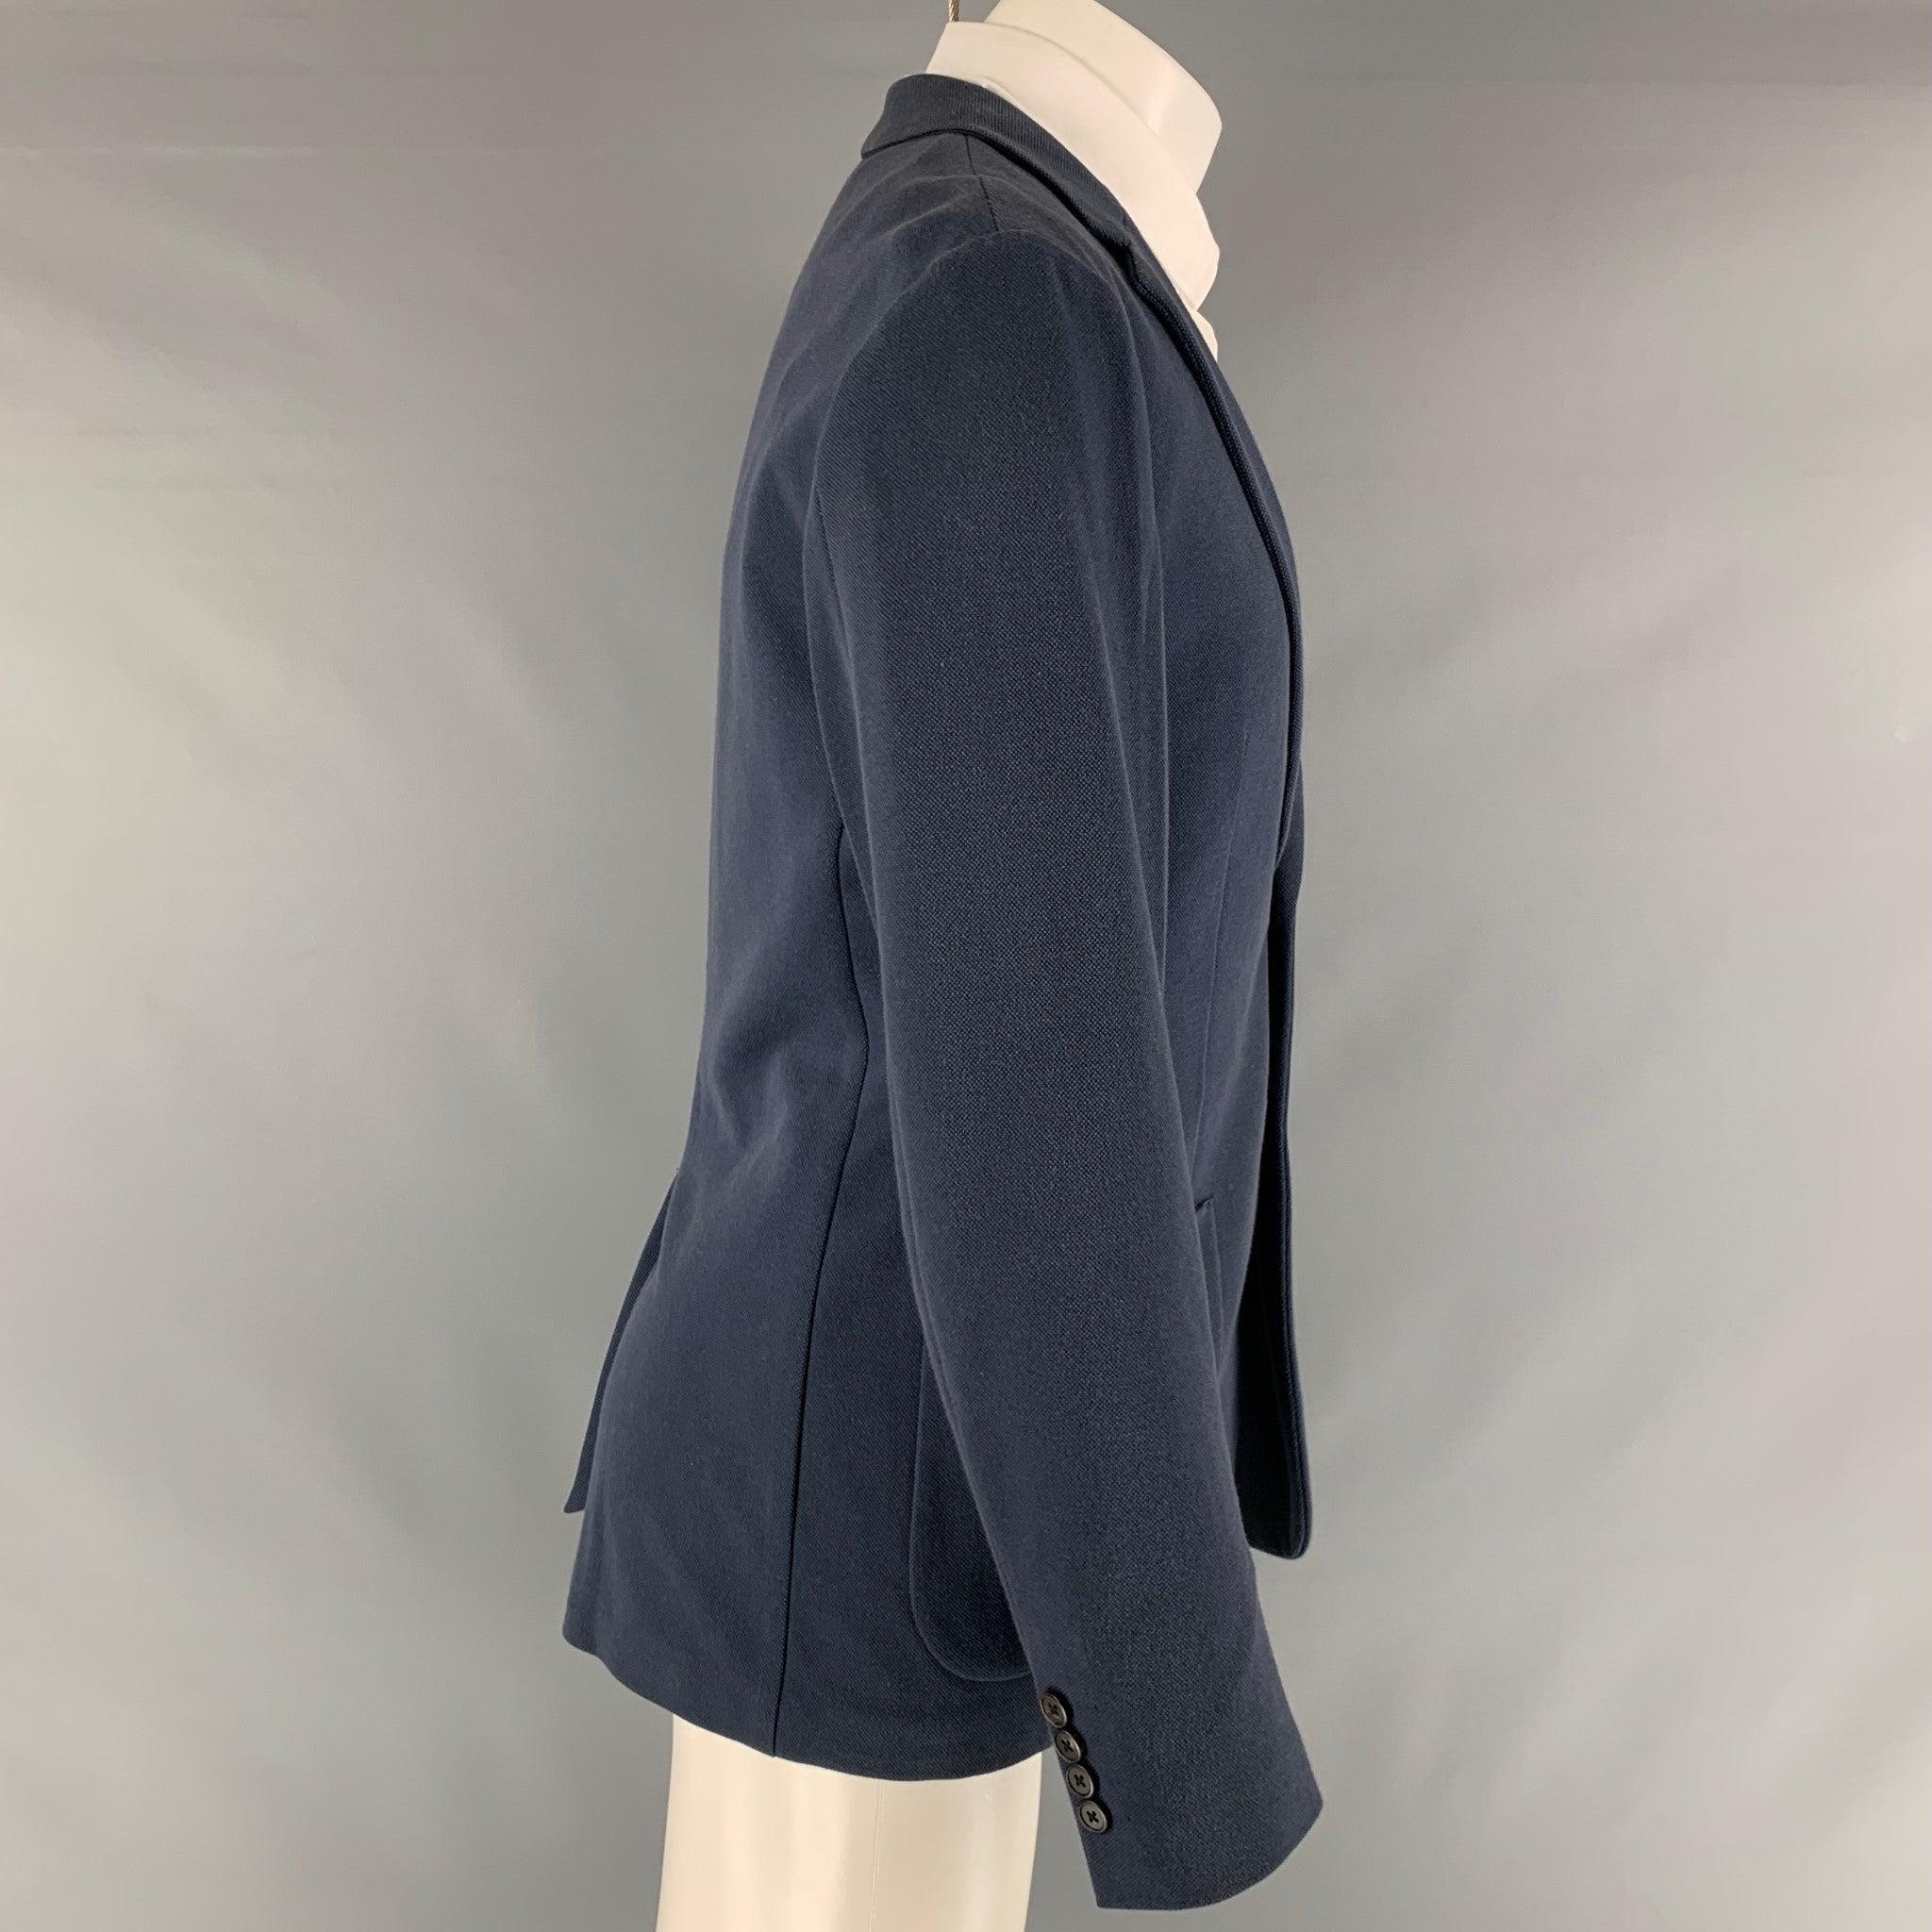 THEORY sport coat comes in a navy cotton blend material featuring a notch lapel, patch pockets, and a double button closure.Very Good Pre-Owned Condition. Moderate Collar Fading. 

Marked:   40  

Measurements: 
 
Shoulder: 18 inches Chest: 40